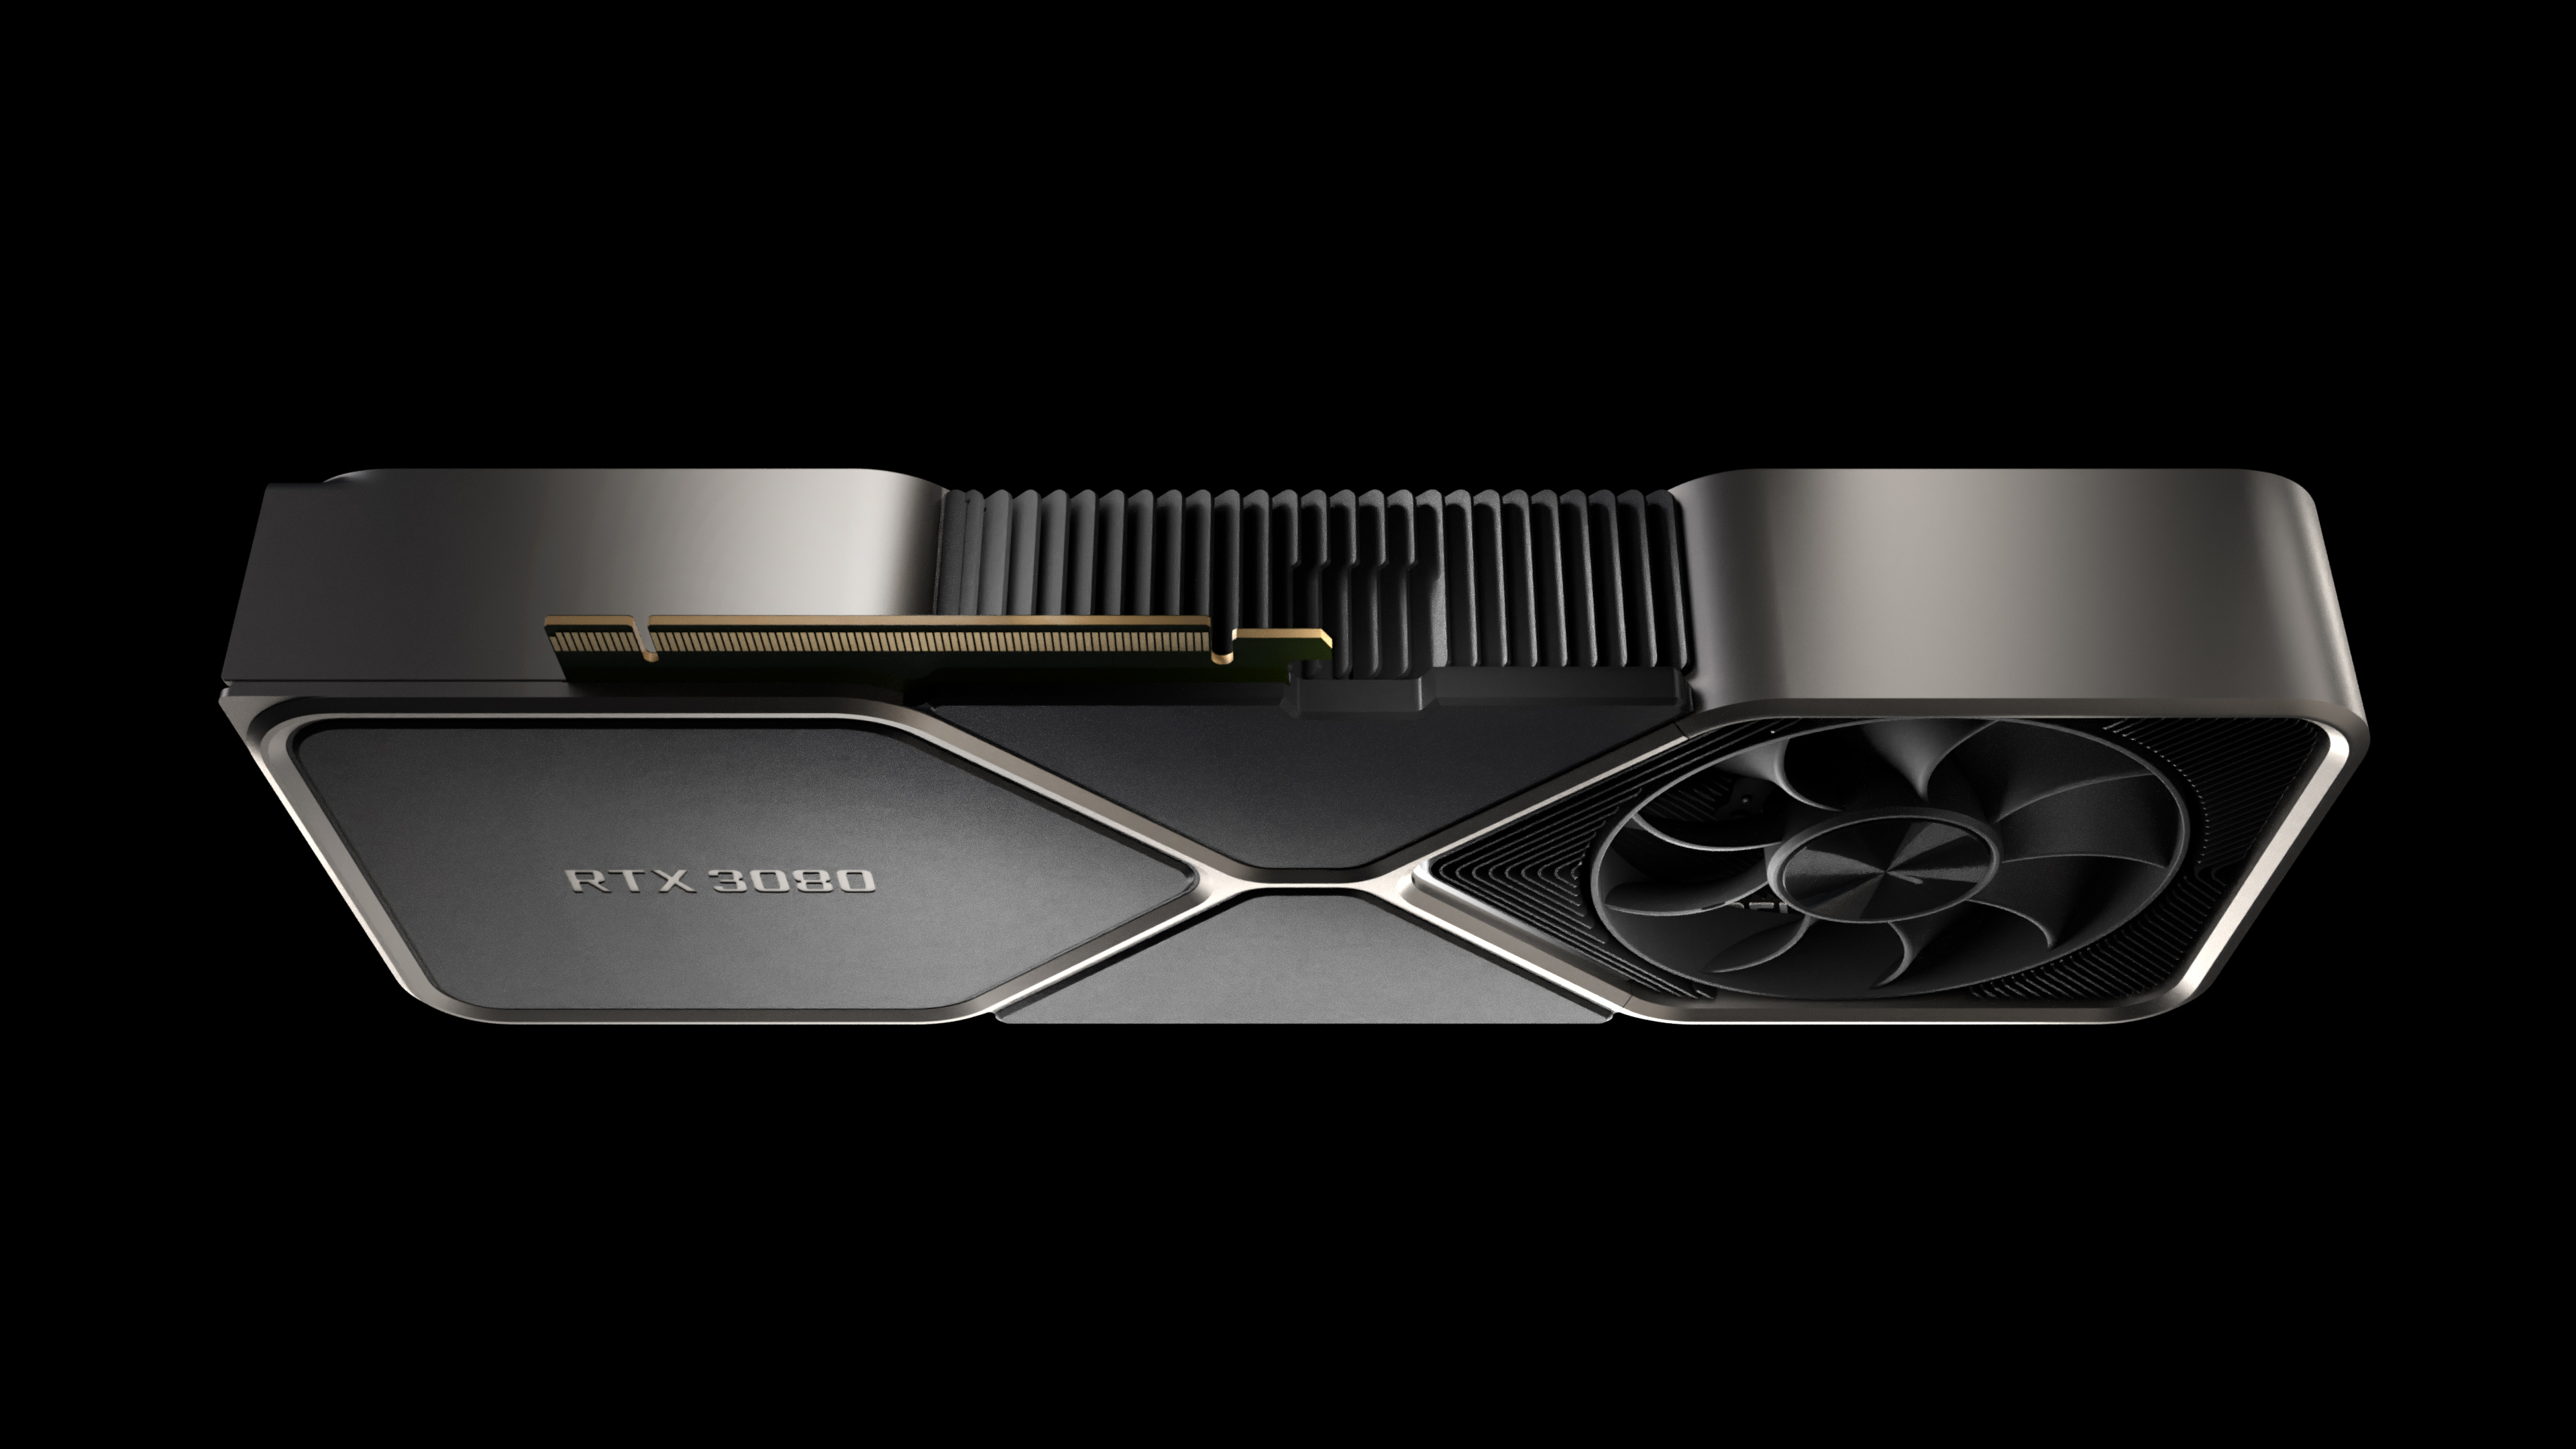 NVIDIA allegedly cancels GeForce RTX 3080 20GB and RTX 3070 16GB 